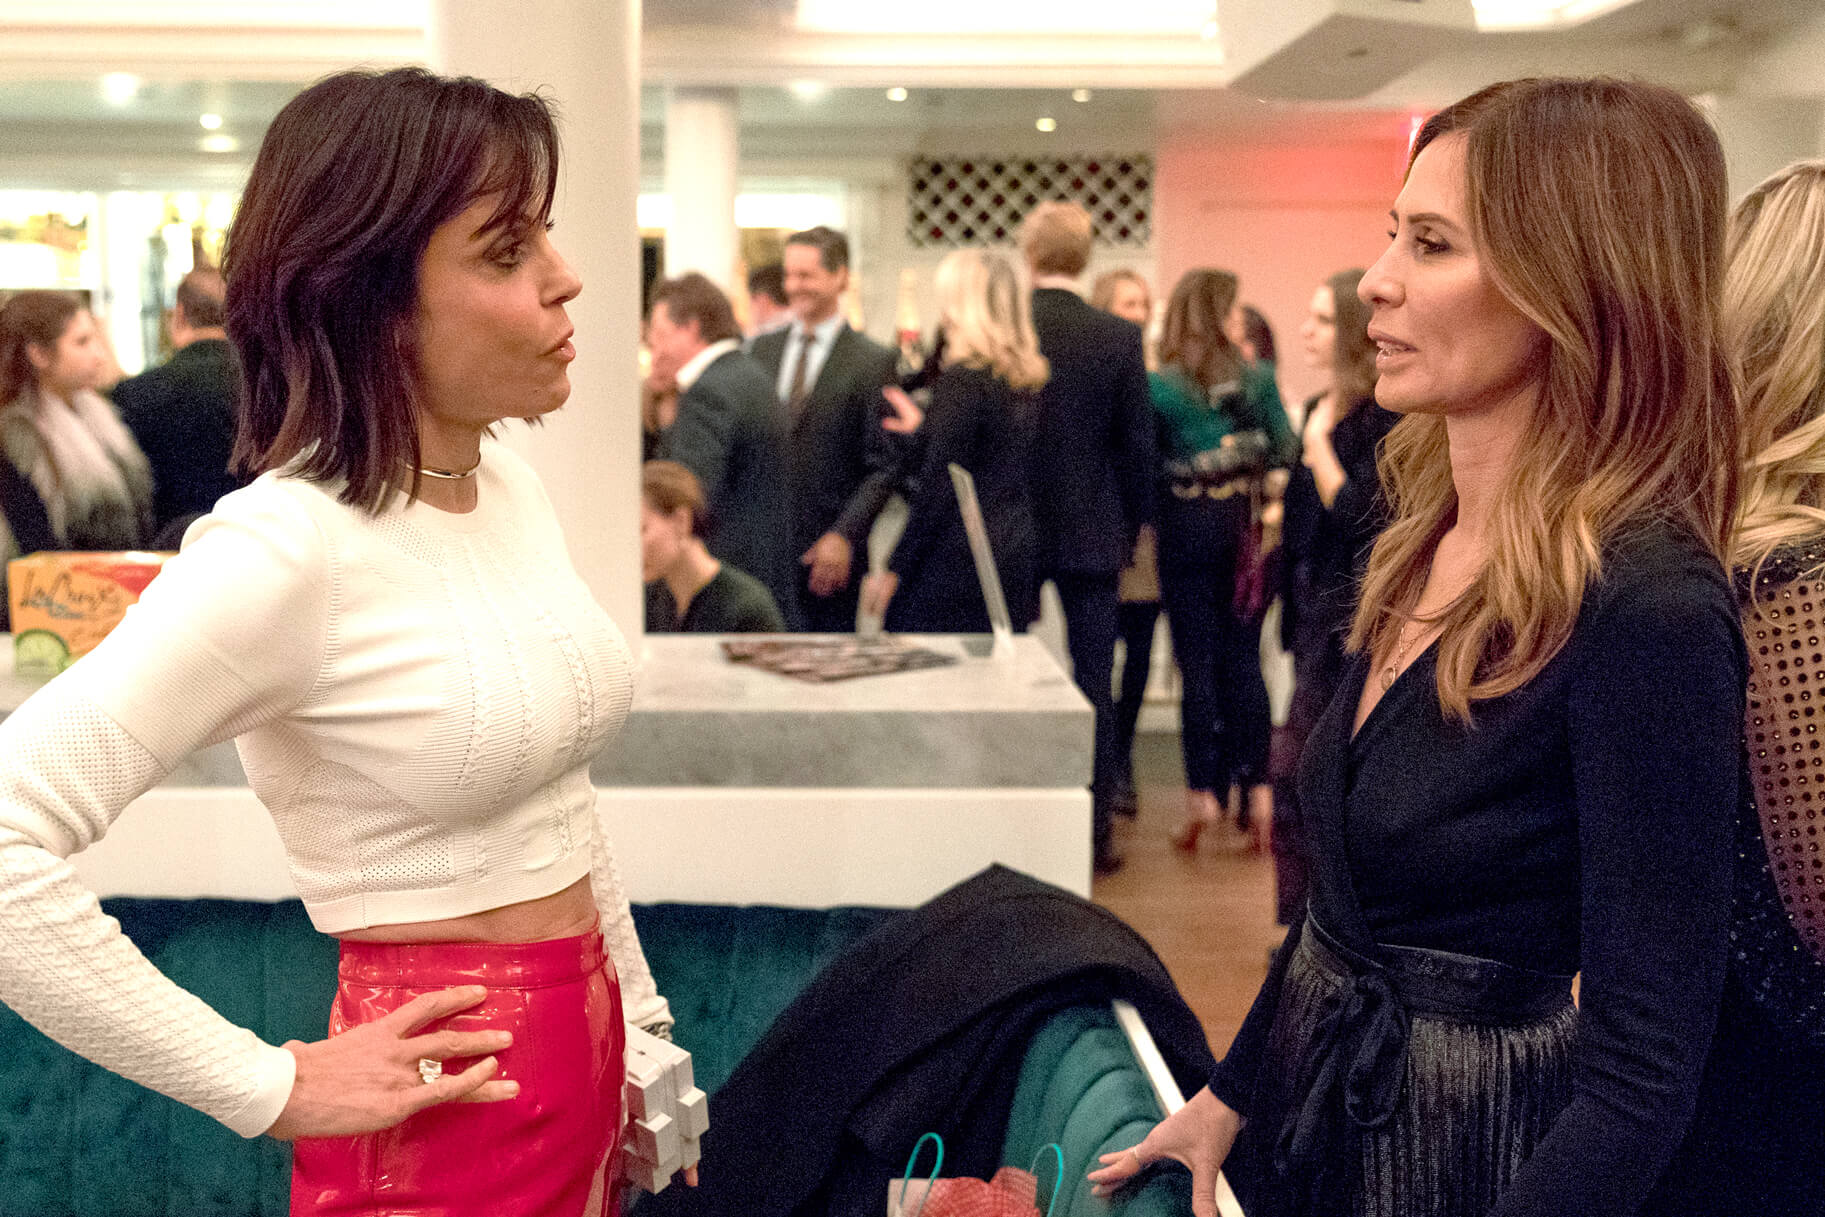 Carole Radziwill Reveals Ex-BFF, Bethenny Frankel, ‘Had Access’ To ‘RHONY’ Producers And Showrunners’ Group Chat!